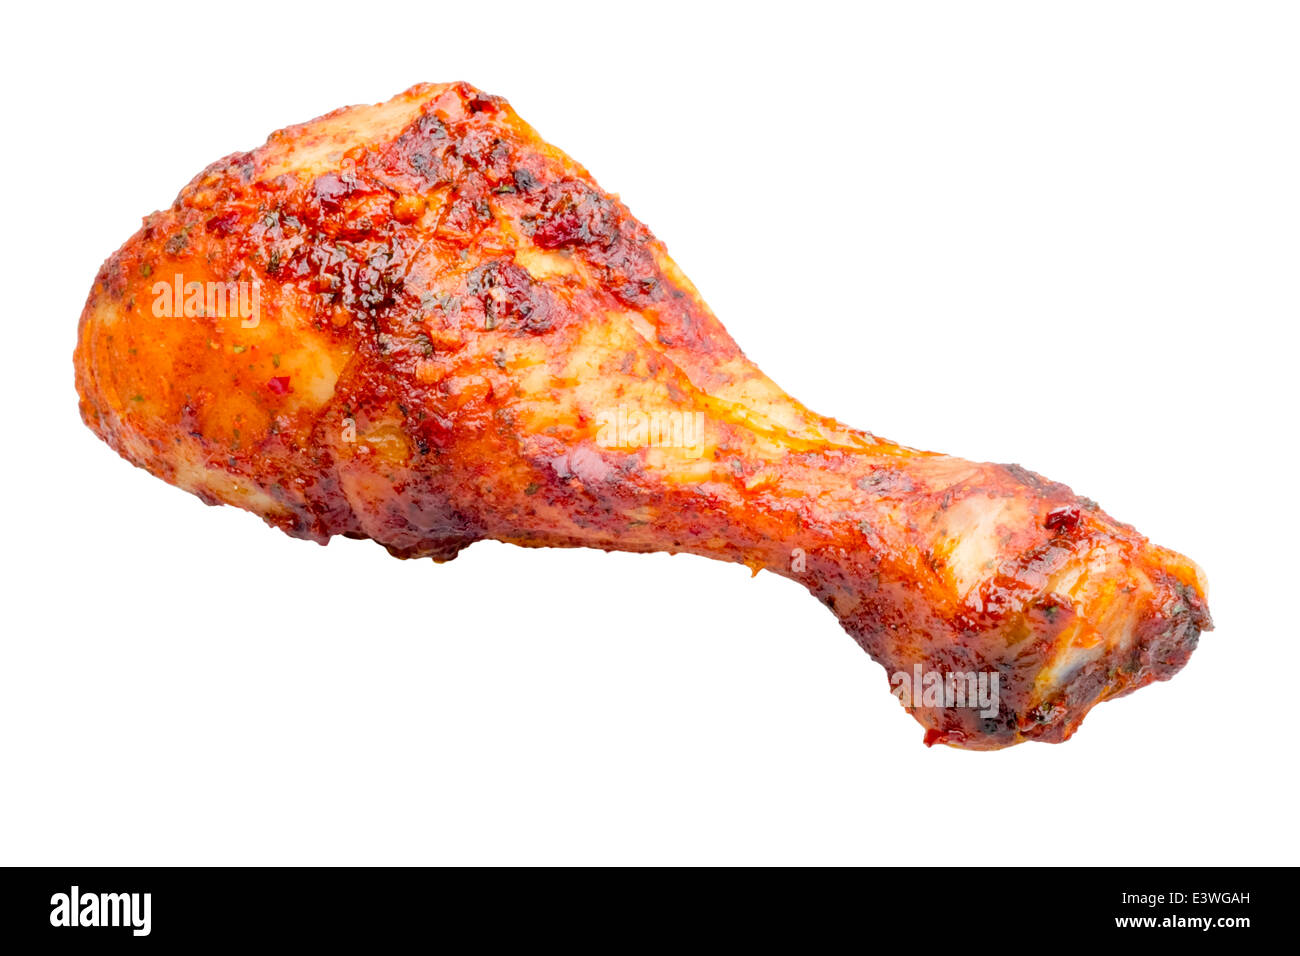 Chicken drumstick cooked with sweet chili sauce, isolated against a white background. Stock Photo